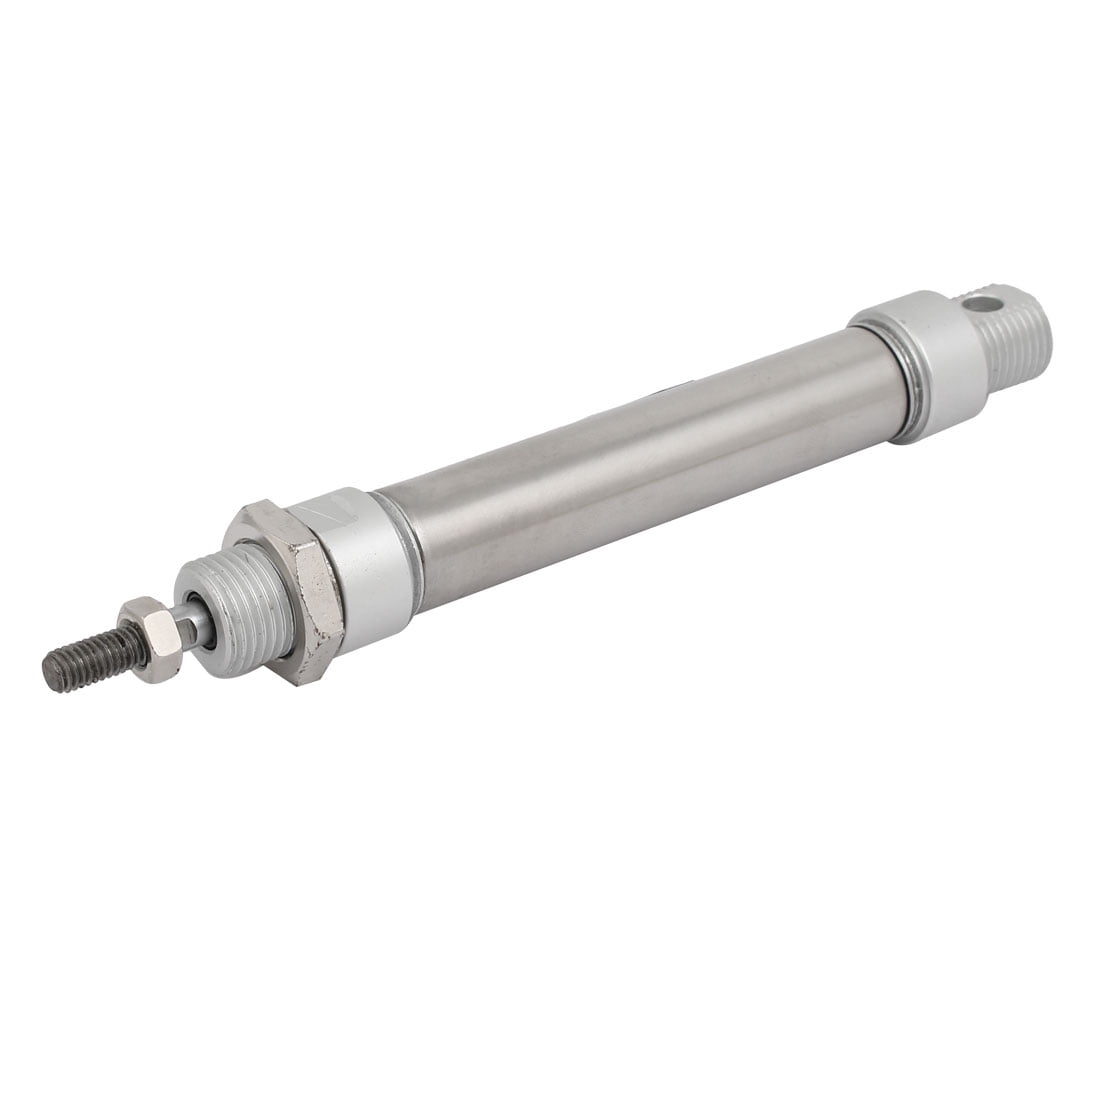 MA16x50 16mm Bore 50mm Stroke Single Rod Double Acting Pneumatic Air Cylinder 